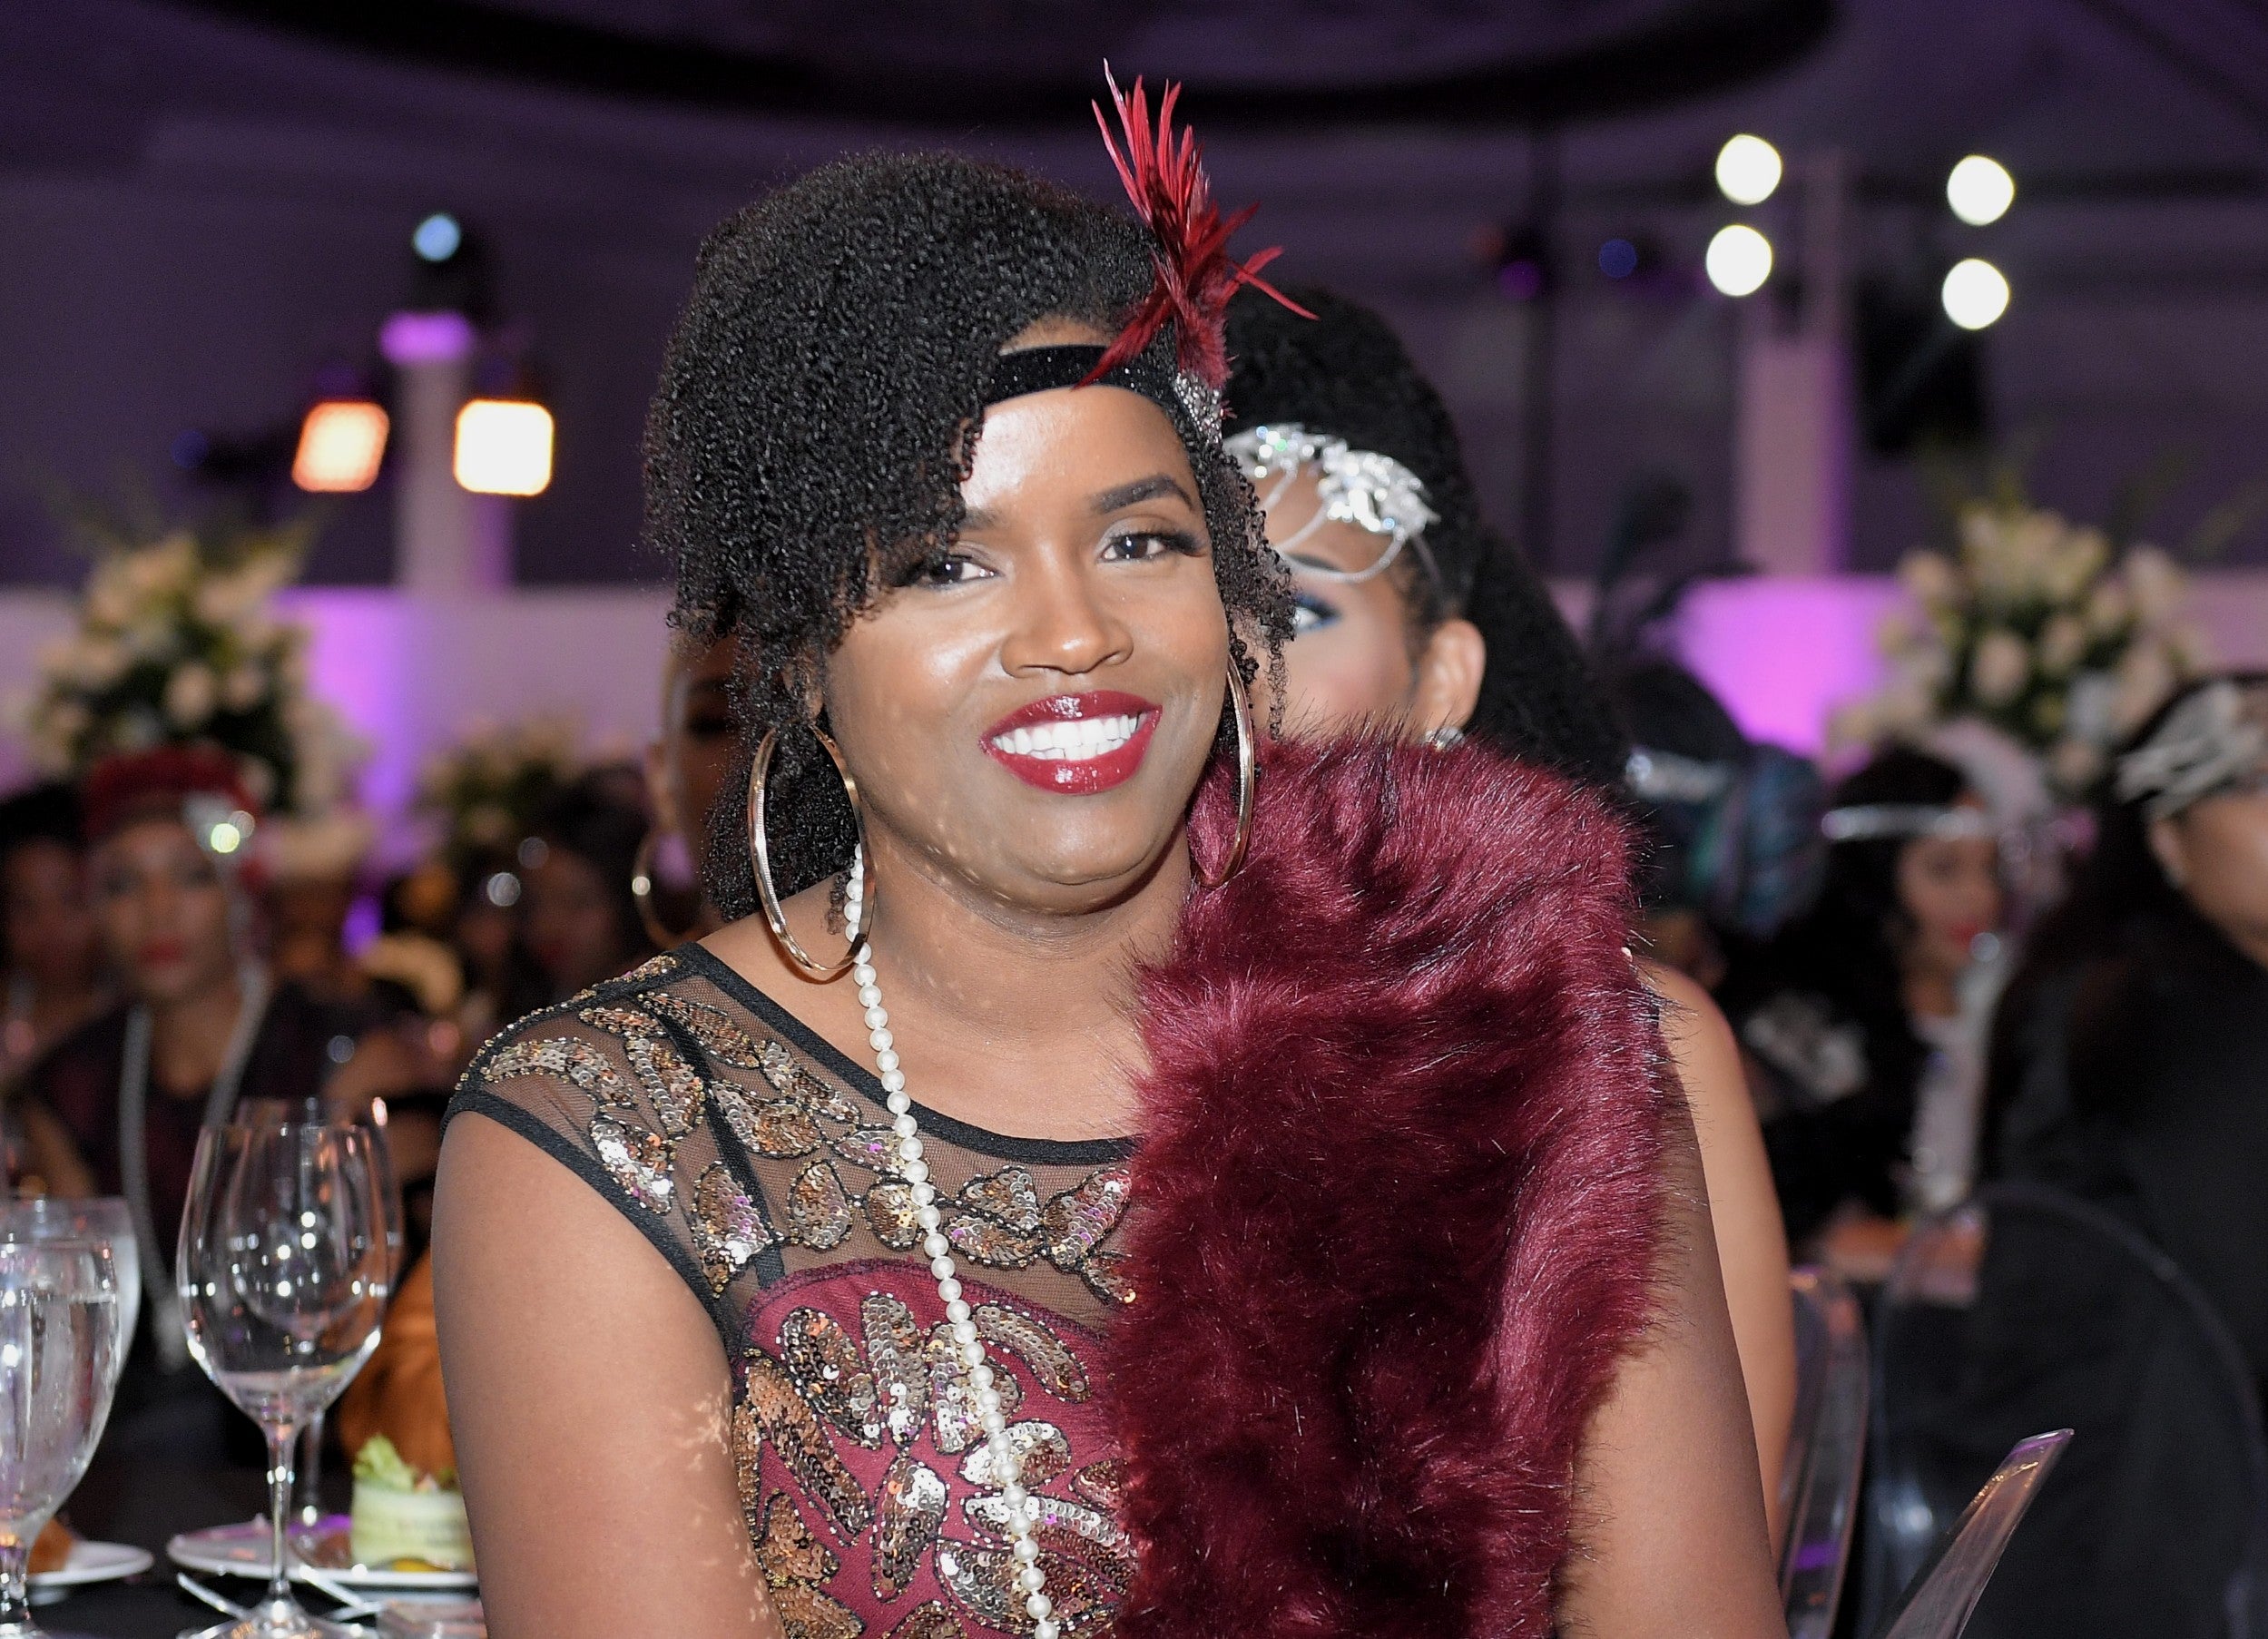 Beauty Moments From The Bawse Conference’s “Harlem Nights” Gala